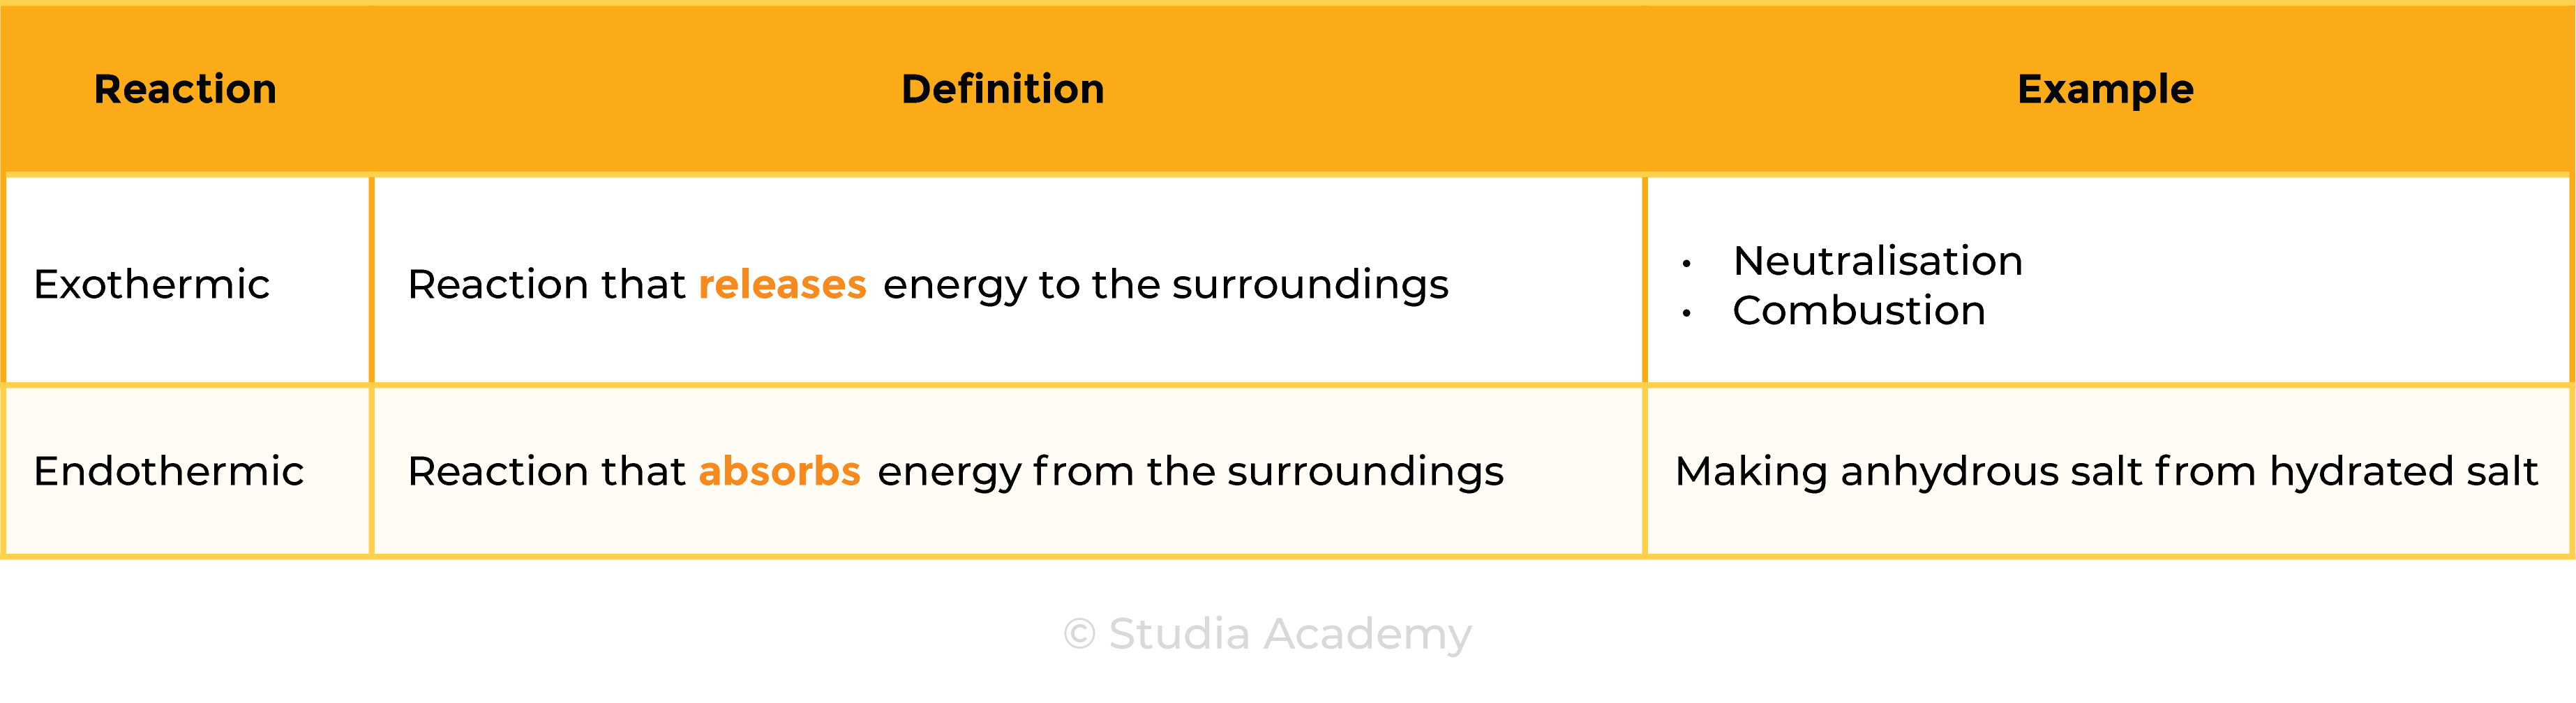 edexcel_igcse_chemistry_topic 18 tables_energetics_001_exothermic and endothermic definitions